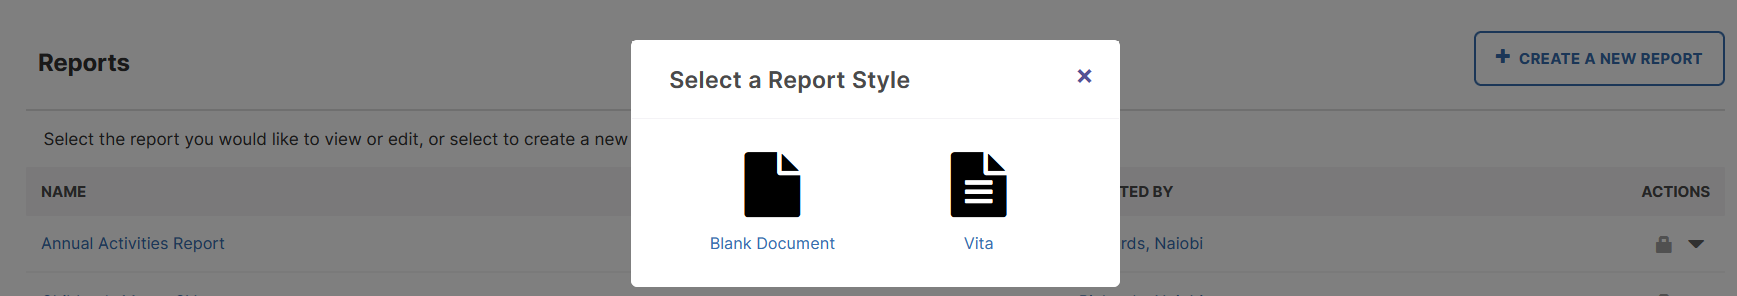 reports-type.png